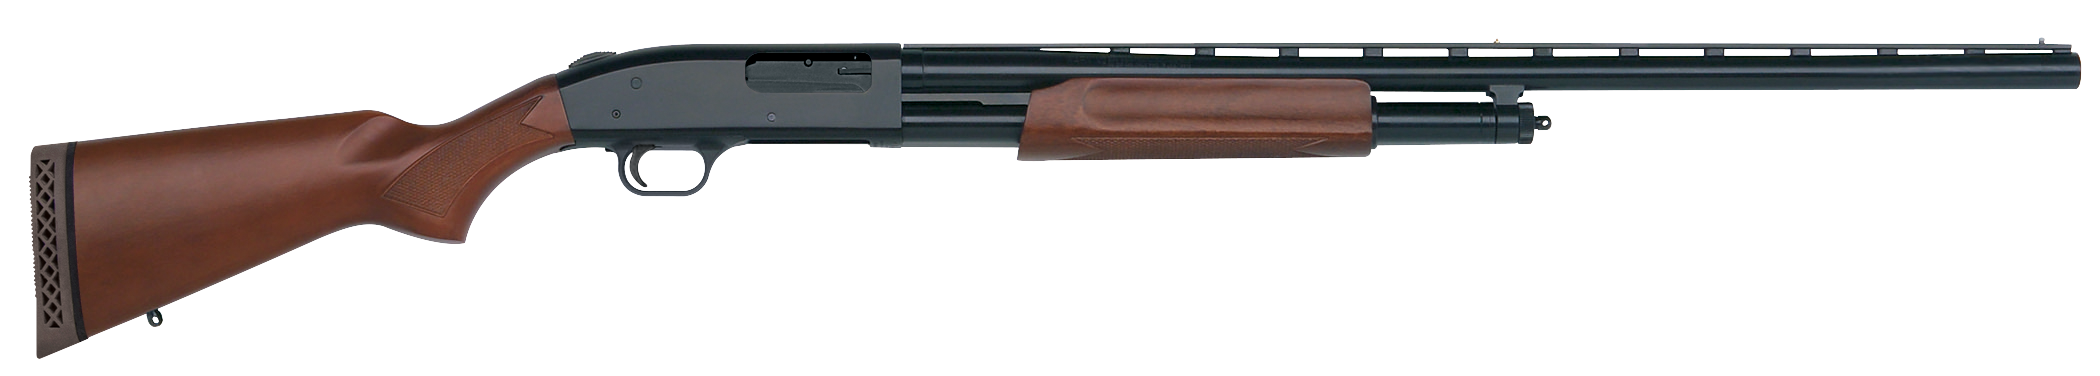 Mossberg 505 YOUTH  ALL-PURPOSE FIELD.